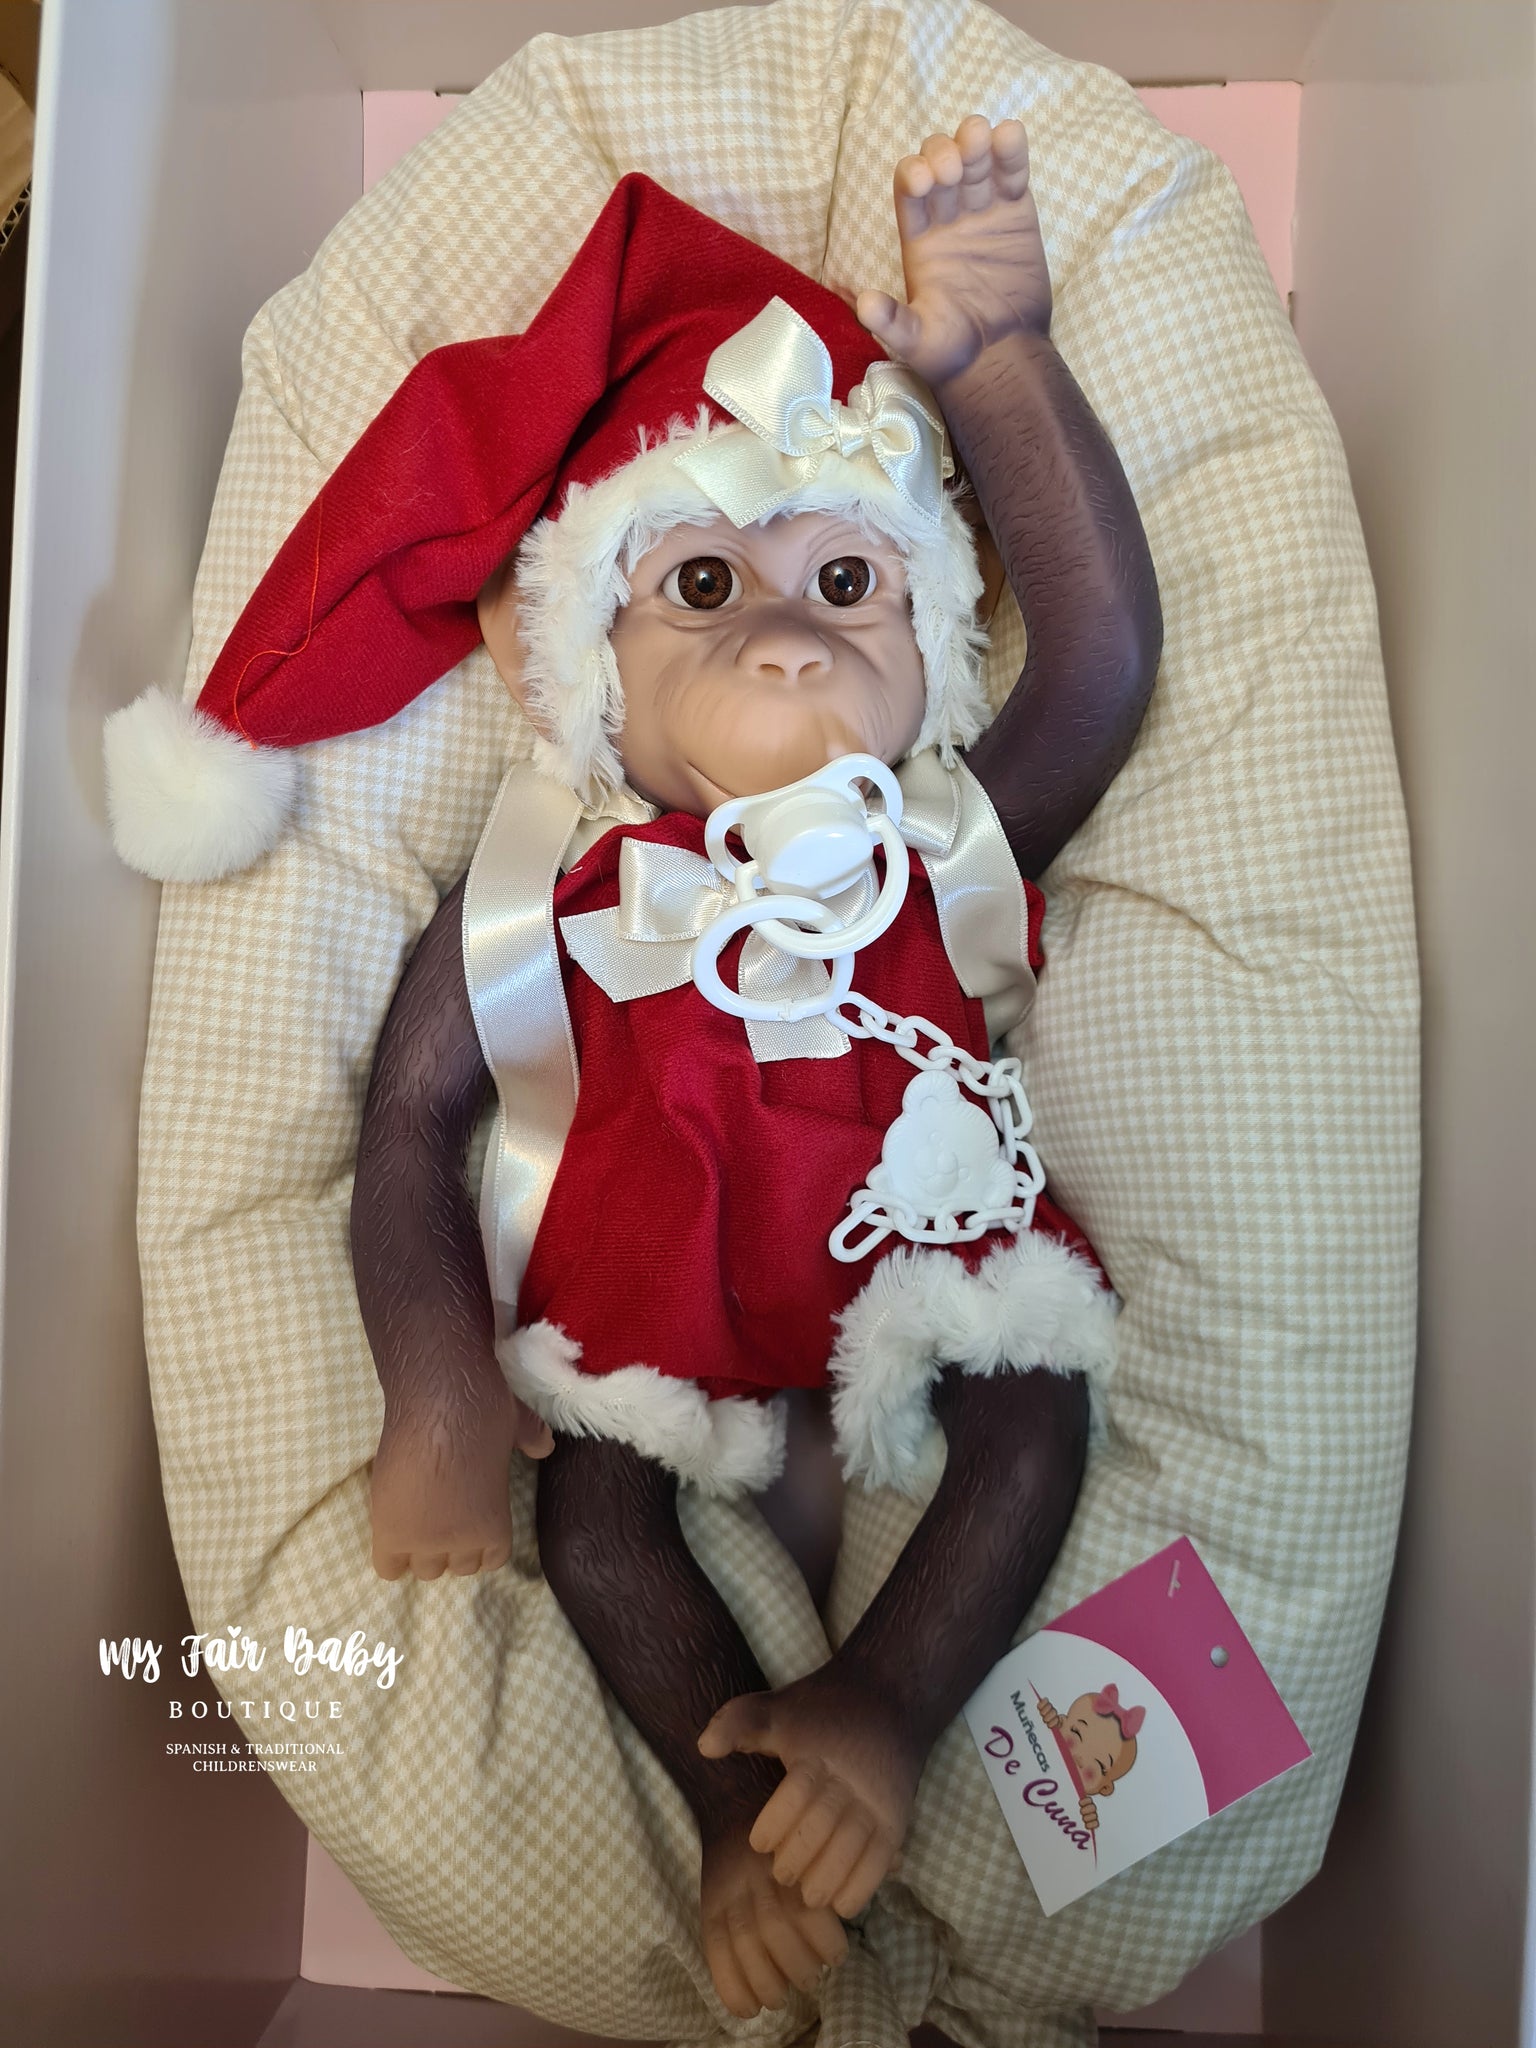 Spanish Baby Lolo Christmas Reborn Monkey Doll 36311 - IN STOCK NOW